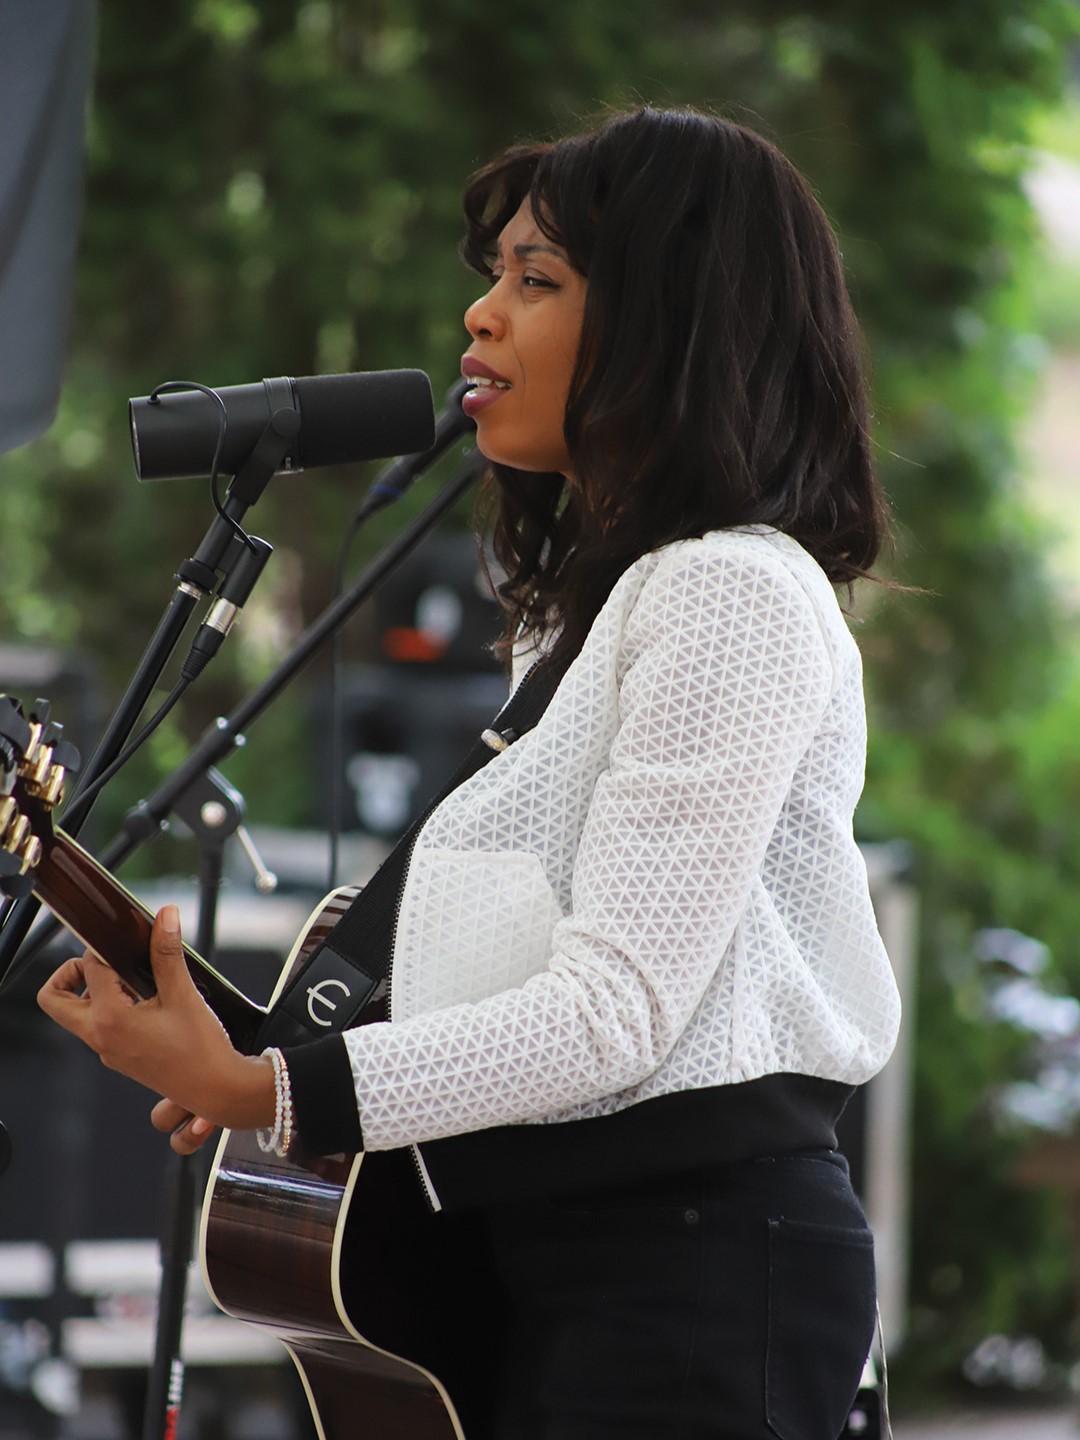 Carolyne Naomi performs at the 2023 Juneteenth event in Edina.